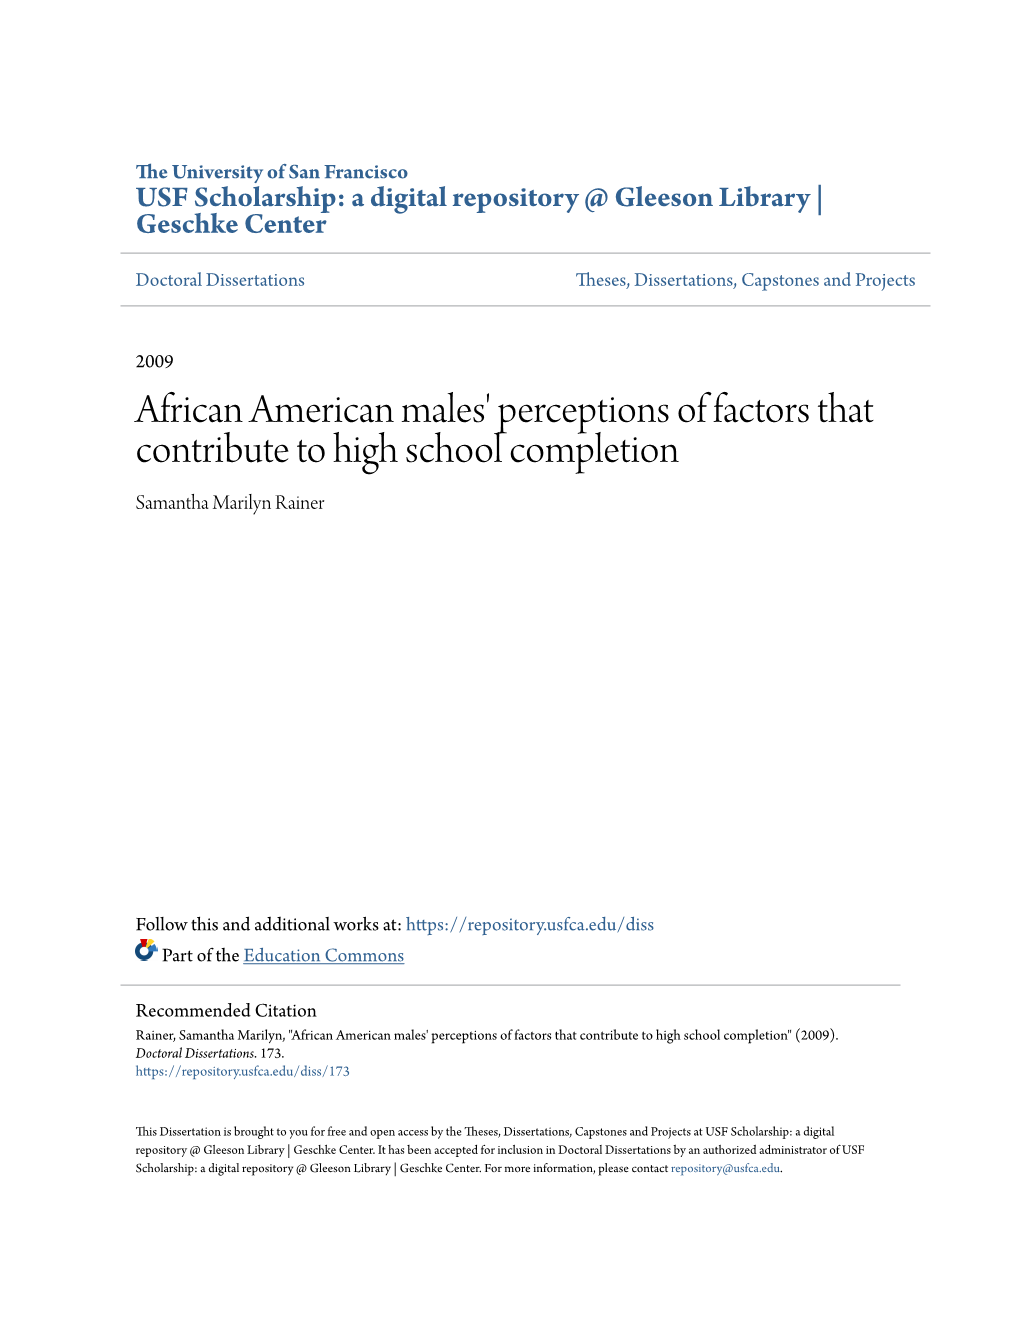 African American Males' Perceptions of Factors That Contribute to High School Completion Samantha Marilyn Rainer